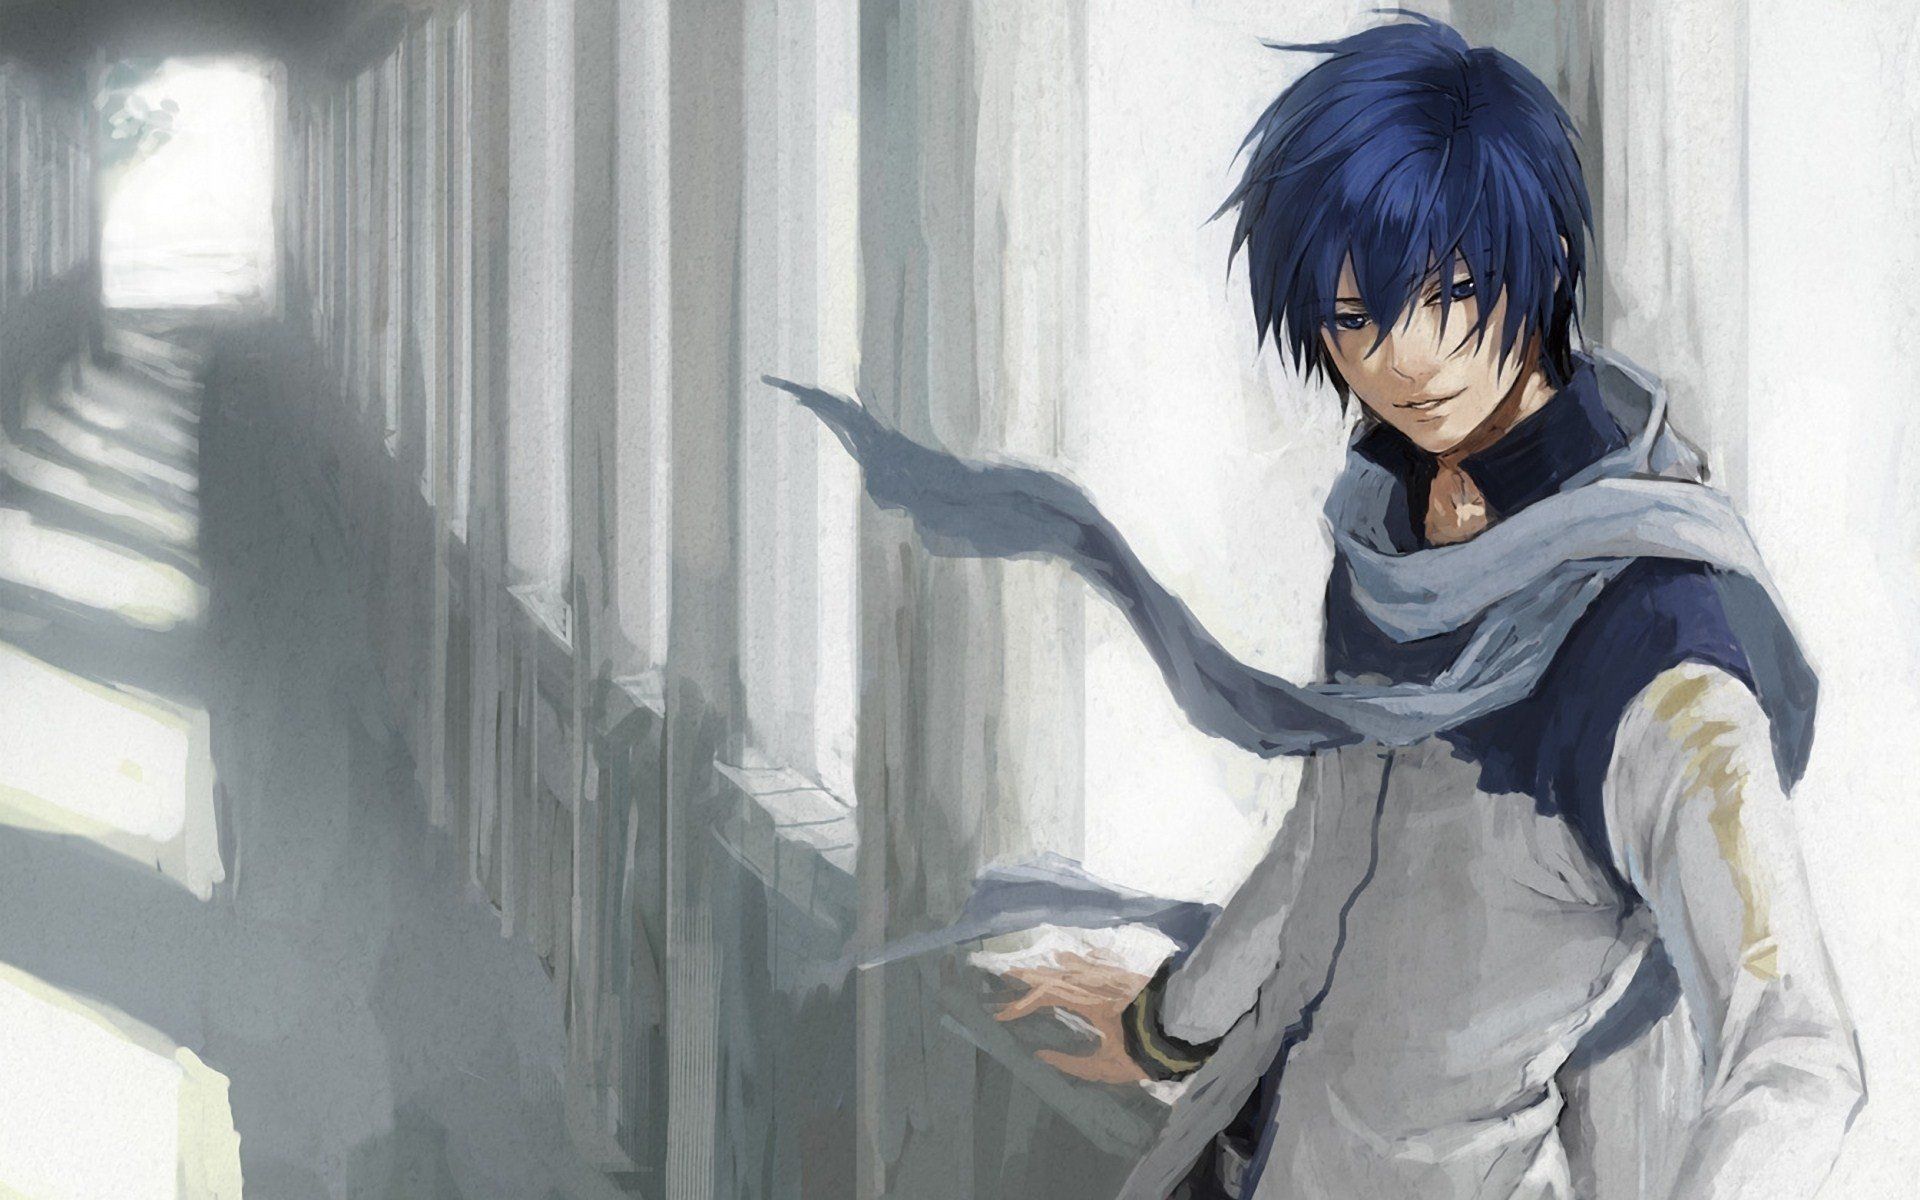 Anime Boy Blue Hair Wallpapers Wallpaper Cave